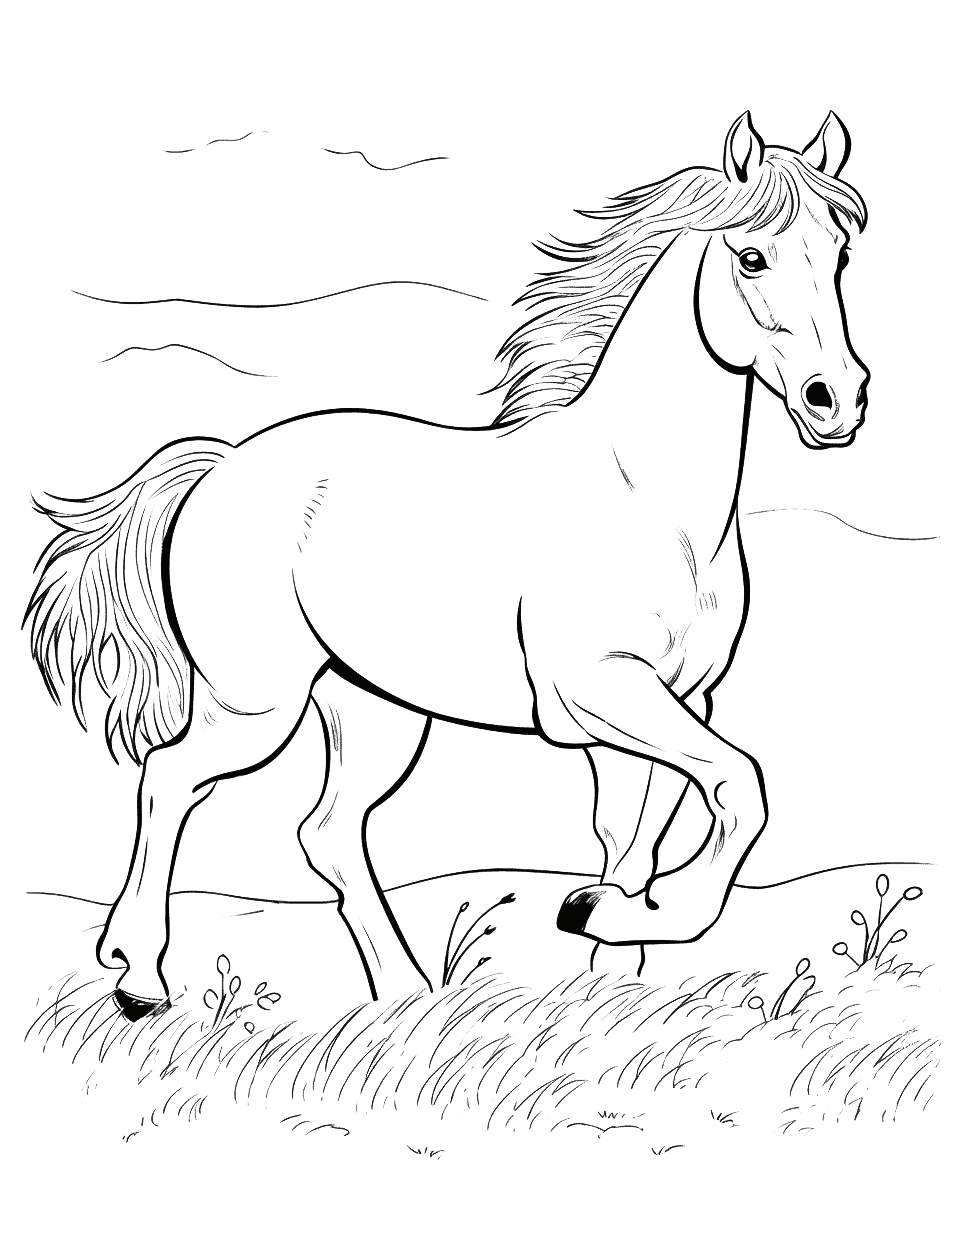 Mustang in the Wild Horse Coloring Page - A dynamic scene of a wild Mustang horse running in a desert landscape.